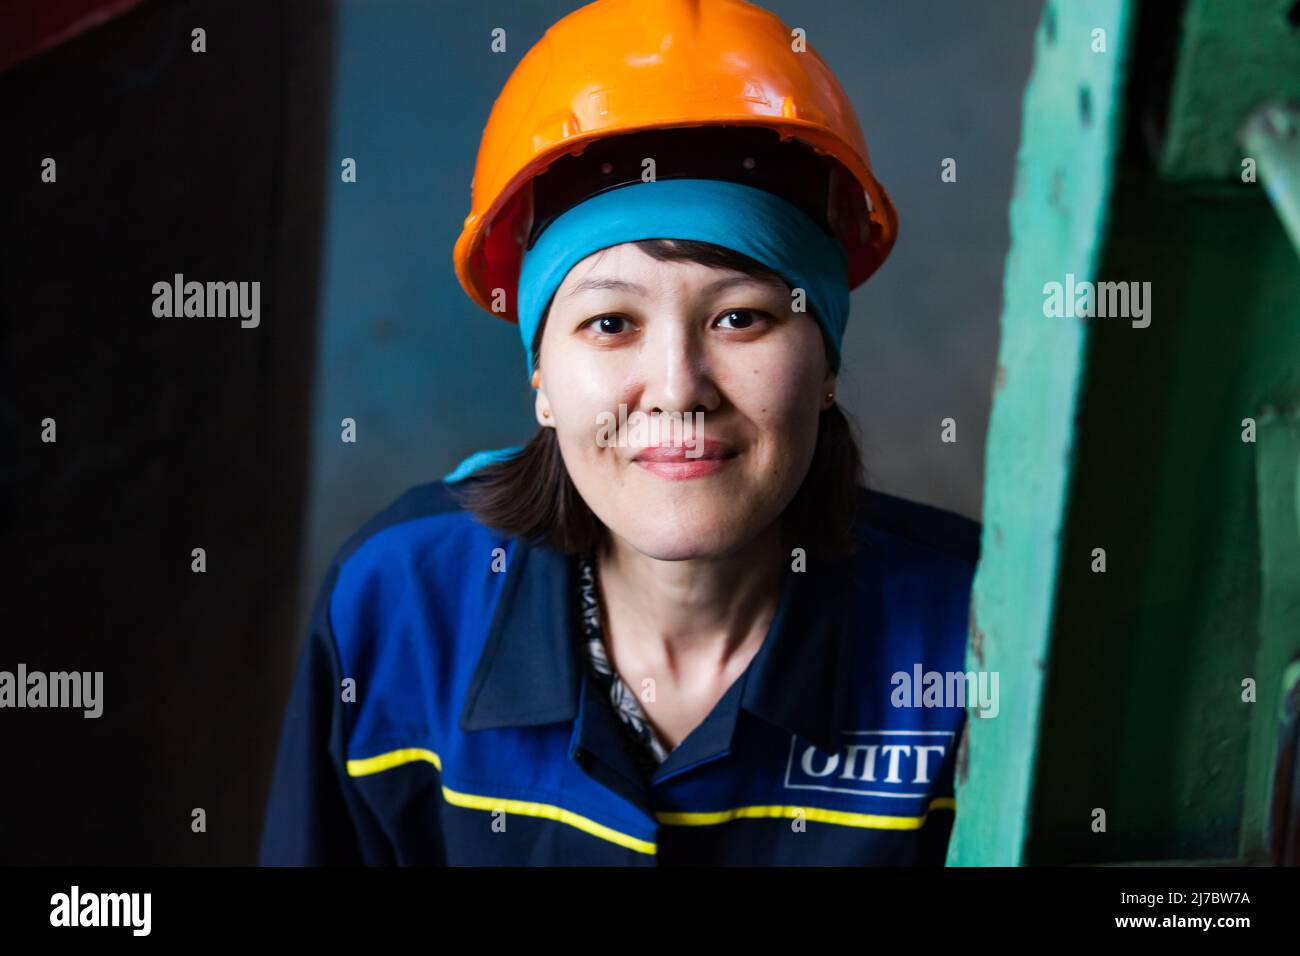 Ust'-Kamenogorsk, Kazakhstan - May 31, 2012: Portrait of young attractive Asian worker woman in blue bandana and orange hardhat. Looks straight in cam Stock Photo